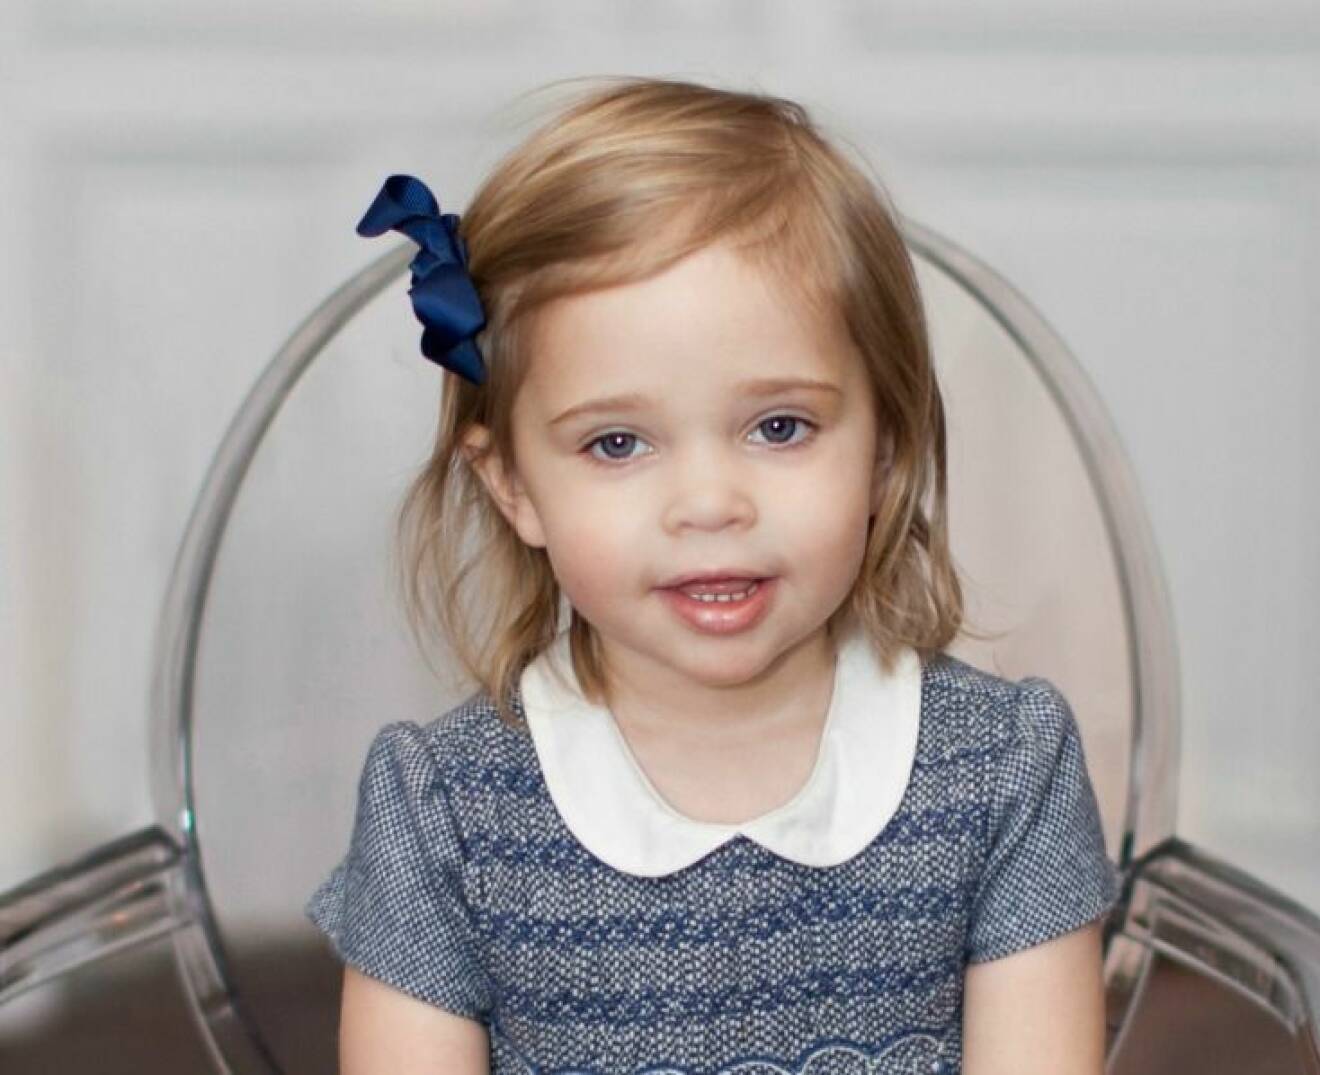 H.K.H. Prinsessan Leonore / H.R.H. Princess Leonore Copyright The Royal Court, Sweden must always be stated on publication.